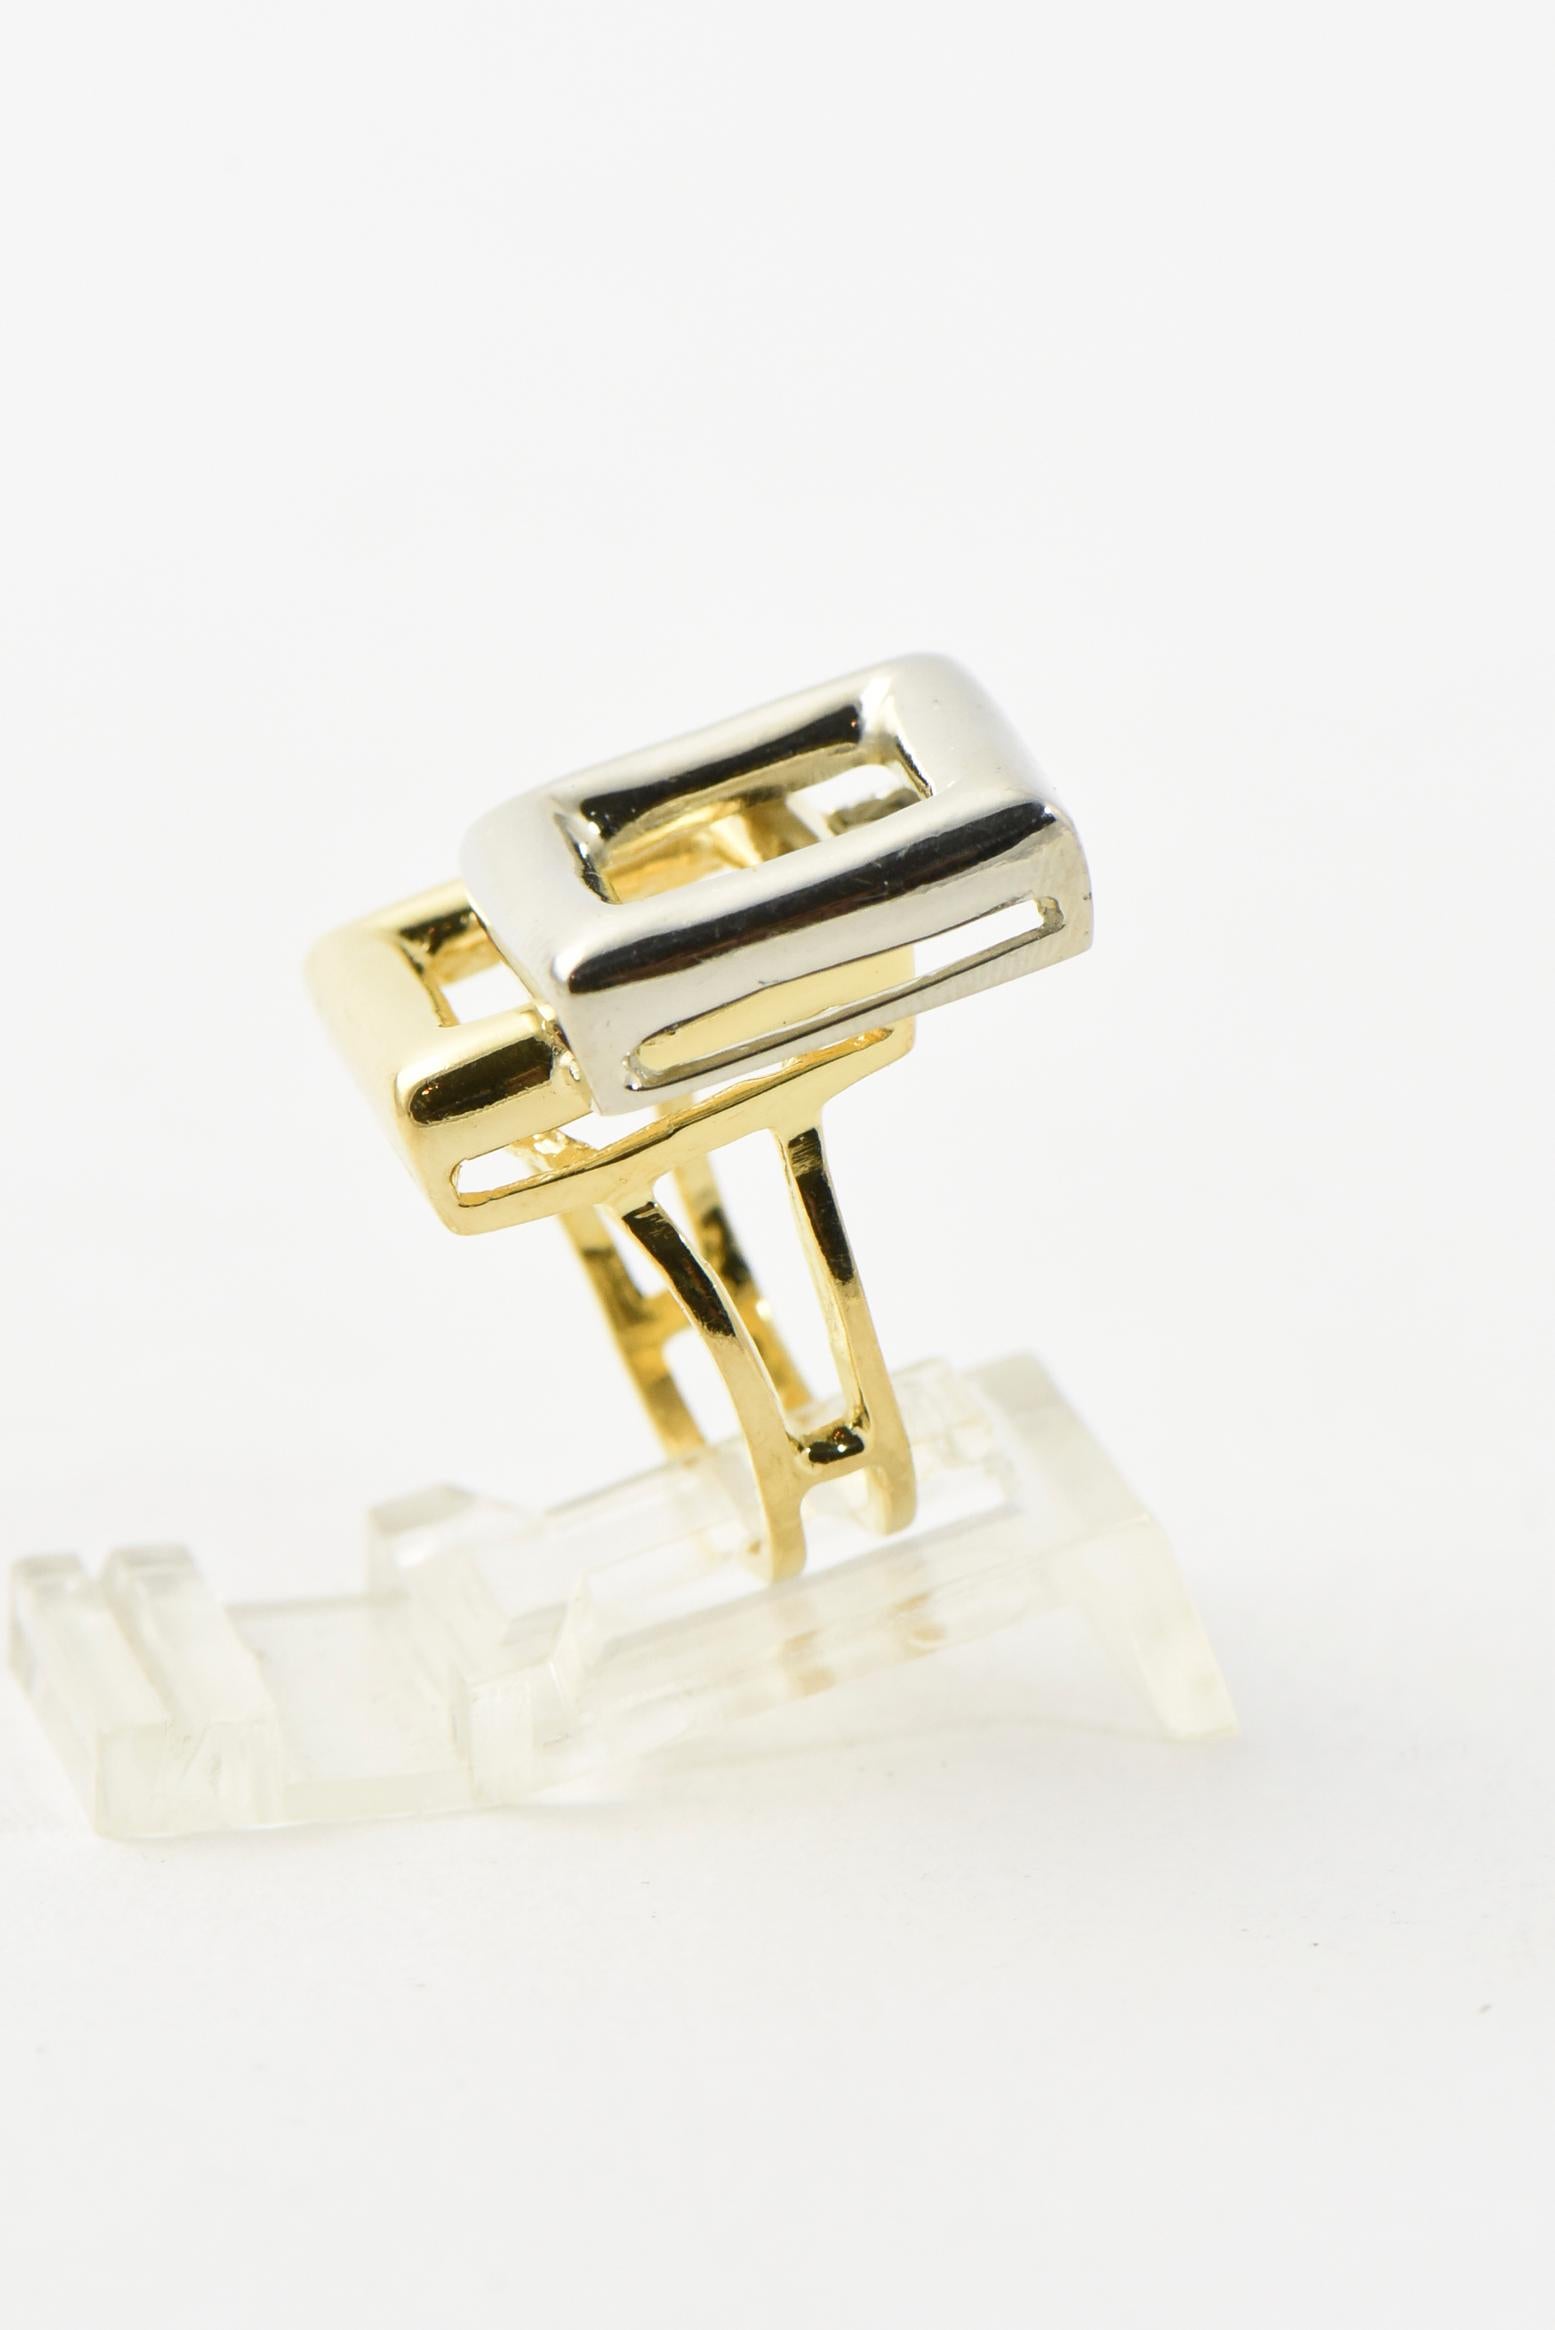 Women's Mid 20th Century Geometric White and Yellow Square Gold Ring For Sale